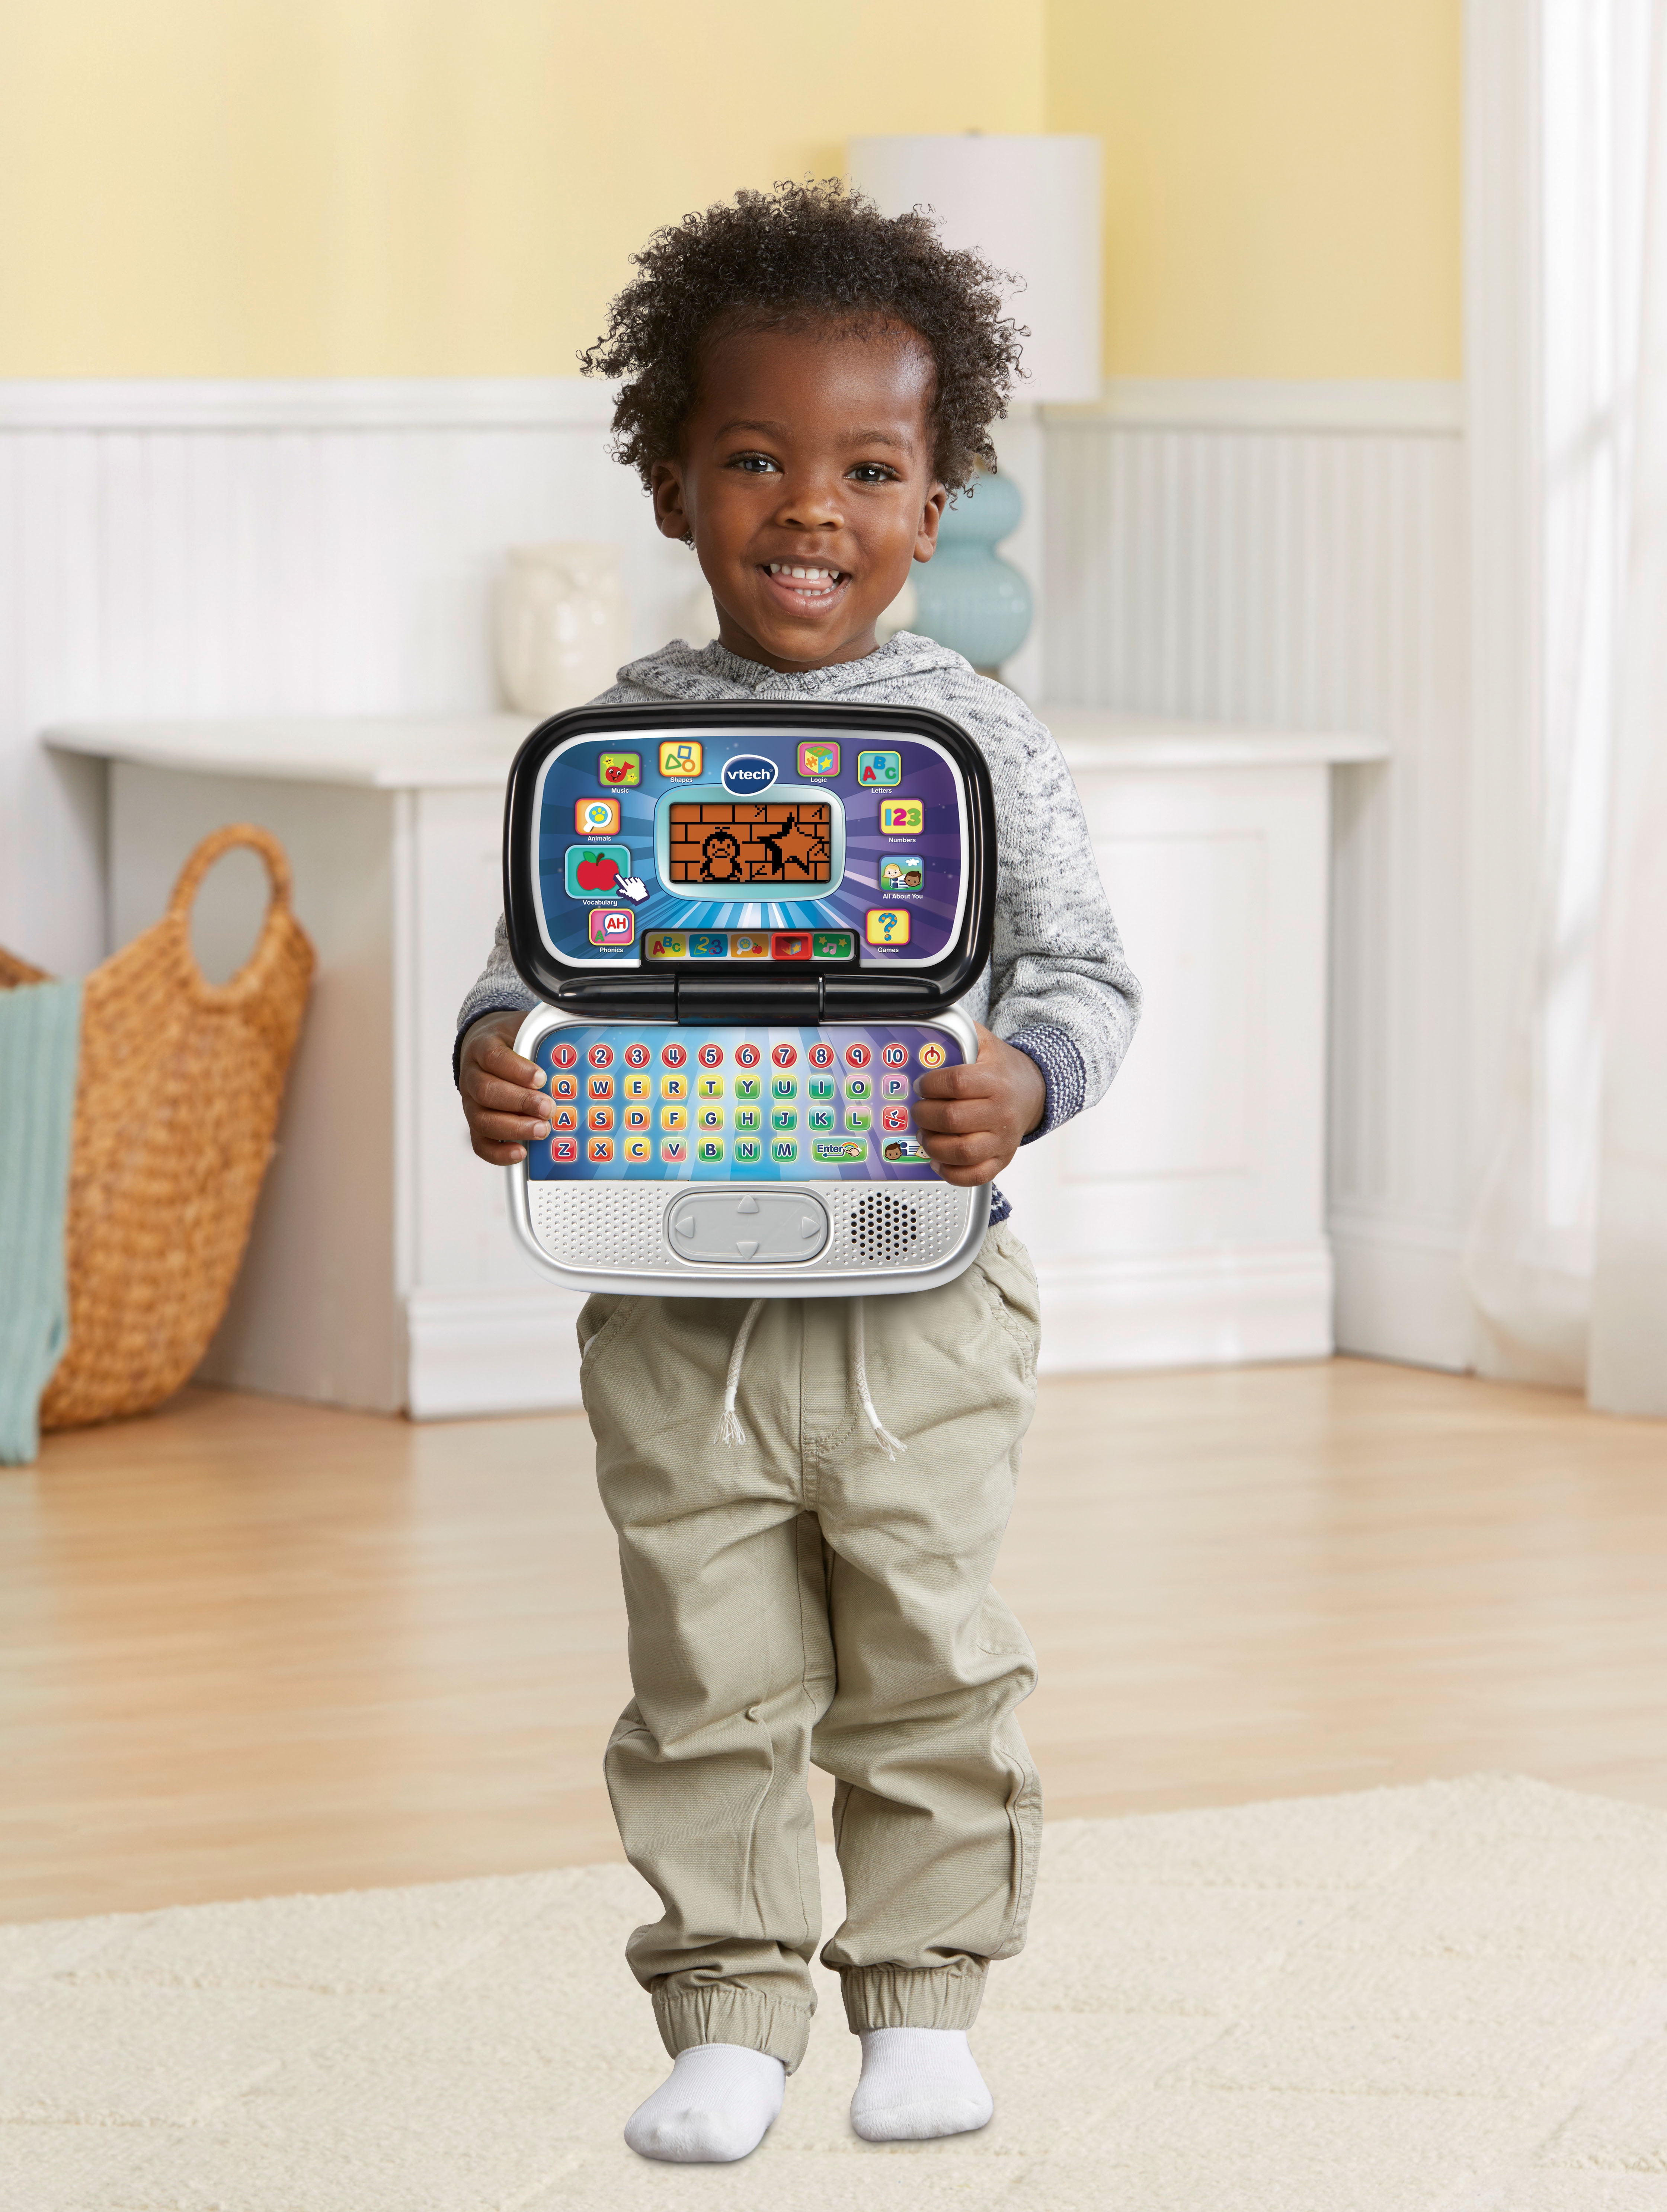 VTech My Laptop For Pre-school Kids¦Learning  Activities¦Melodies¦Games¦Pink¦3